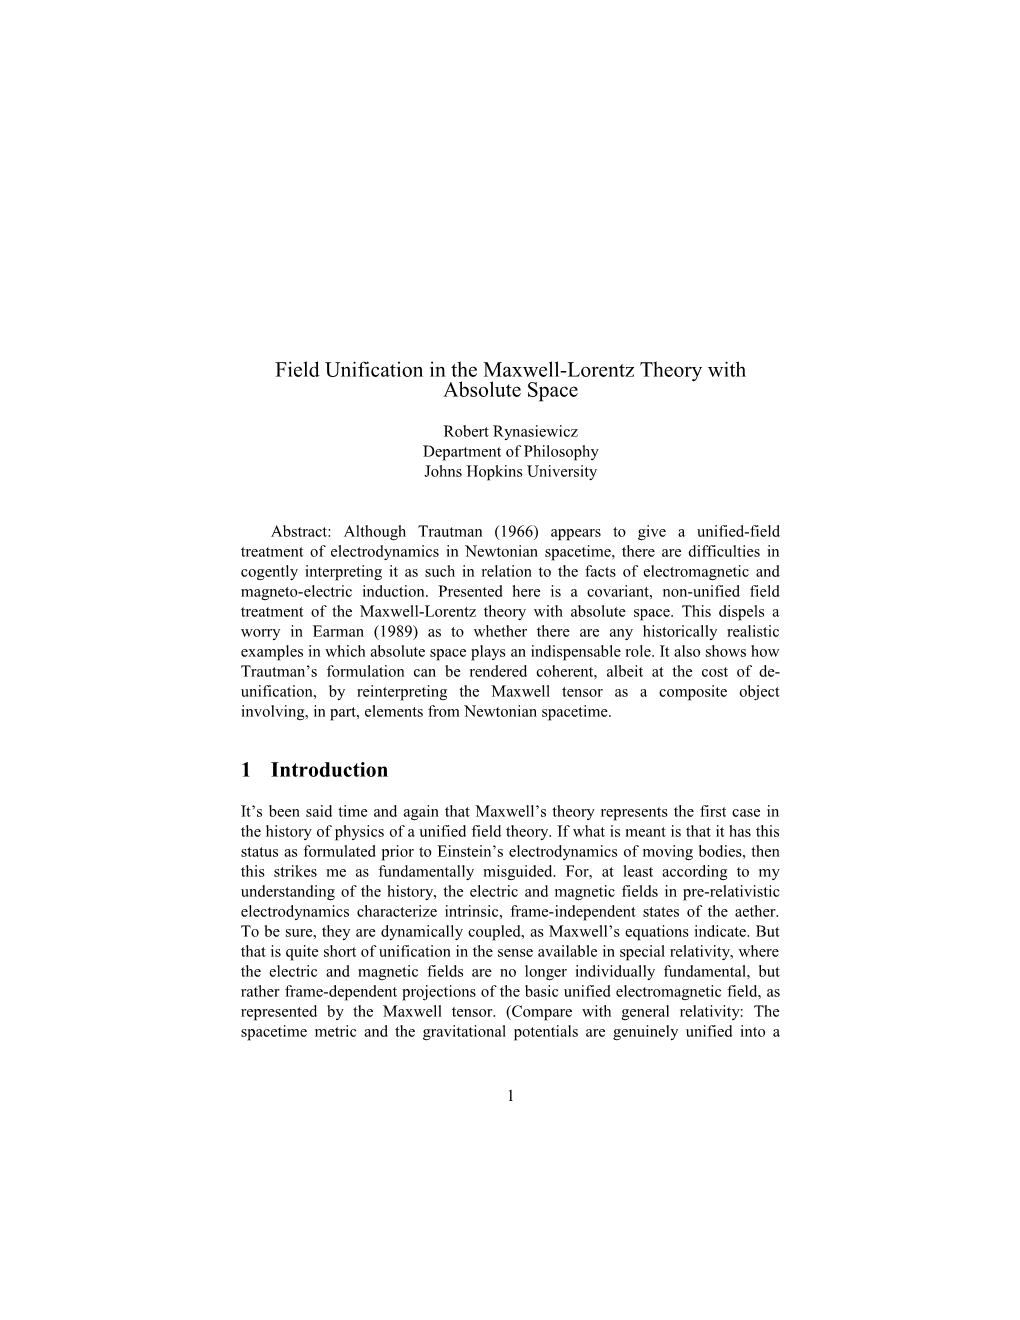 Field Unifcation in the Maxwell-Lorentz Theory With